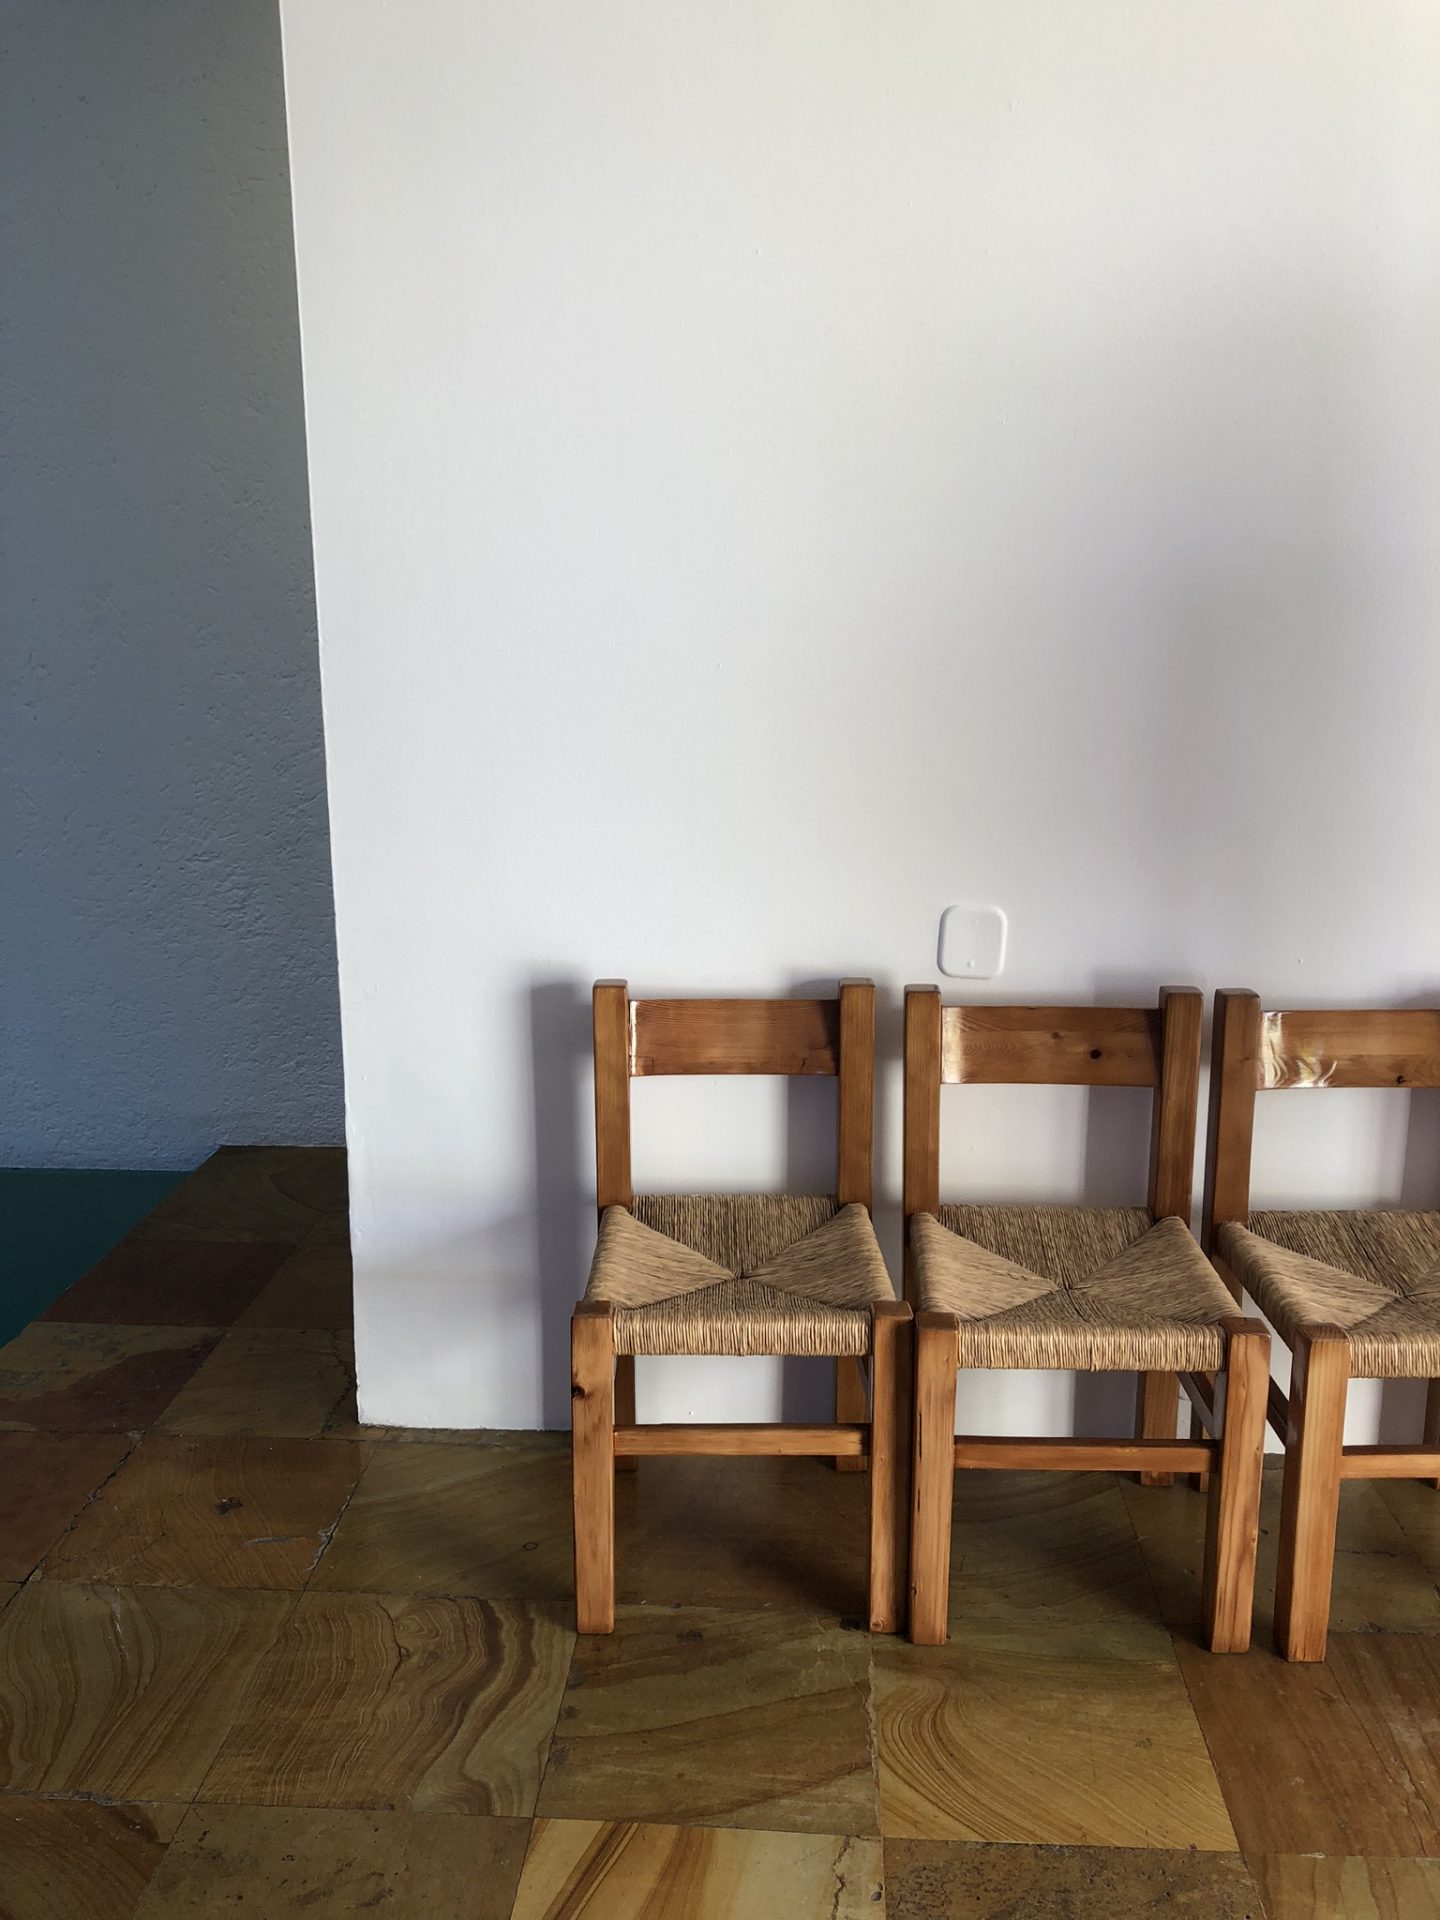 Chairs in the house, Mexico City